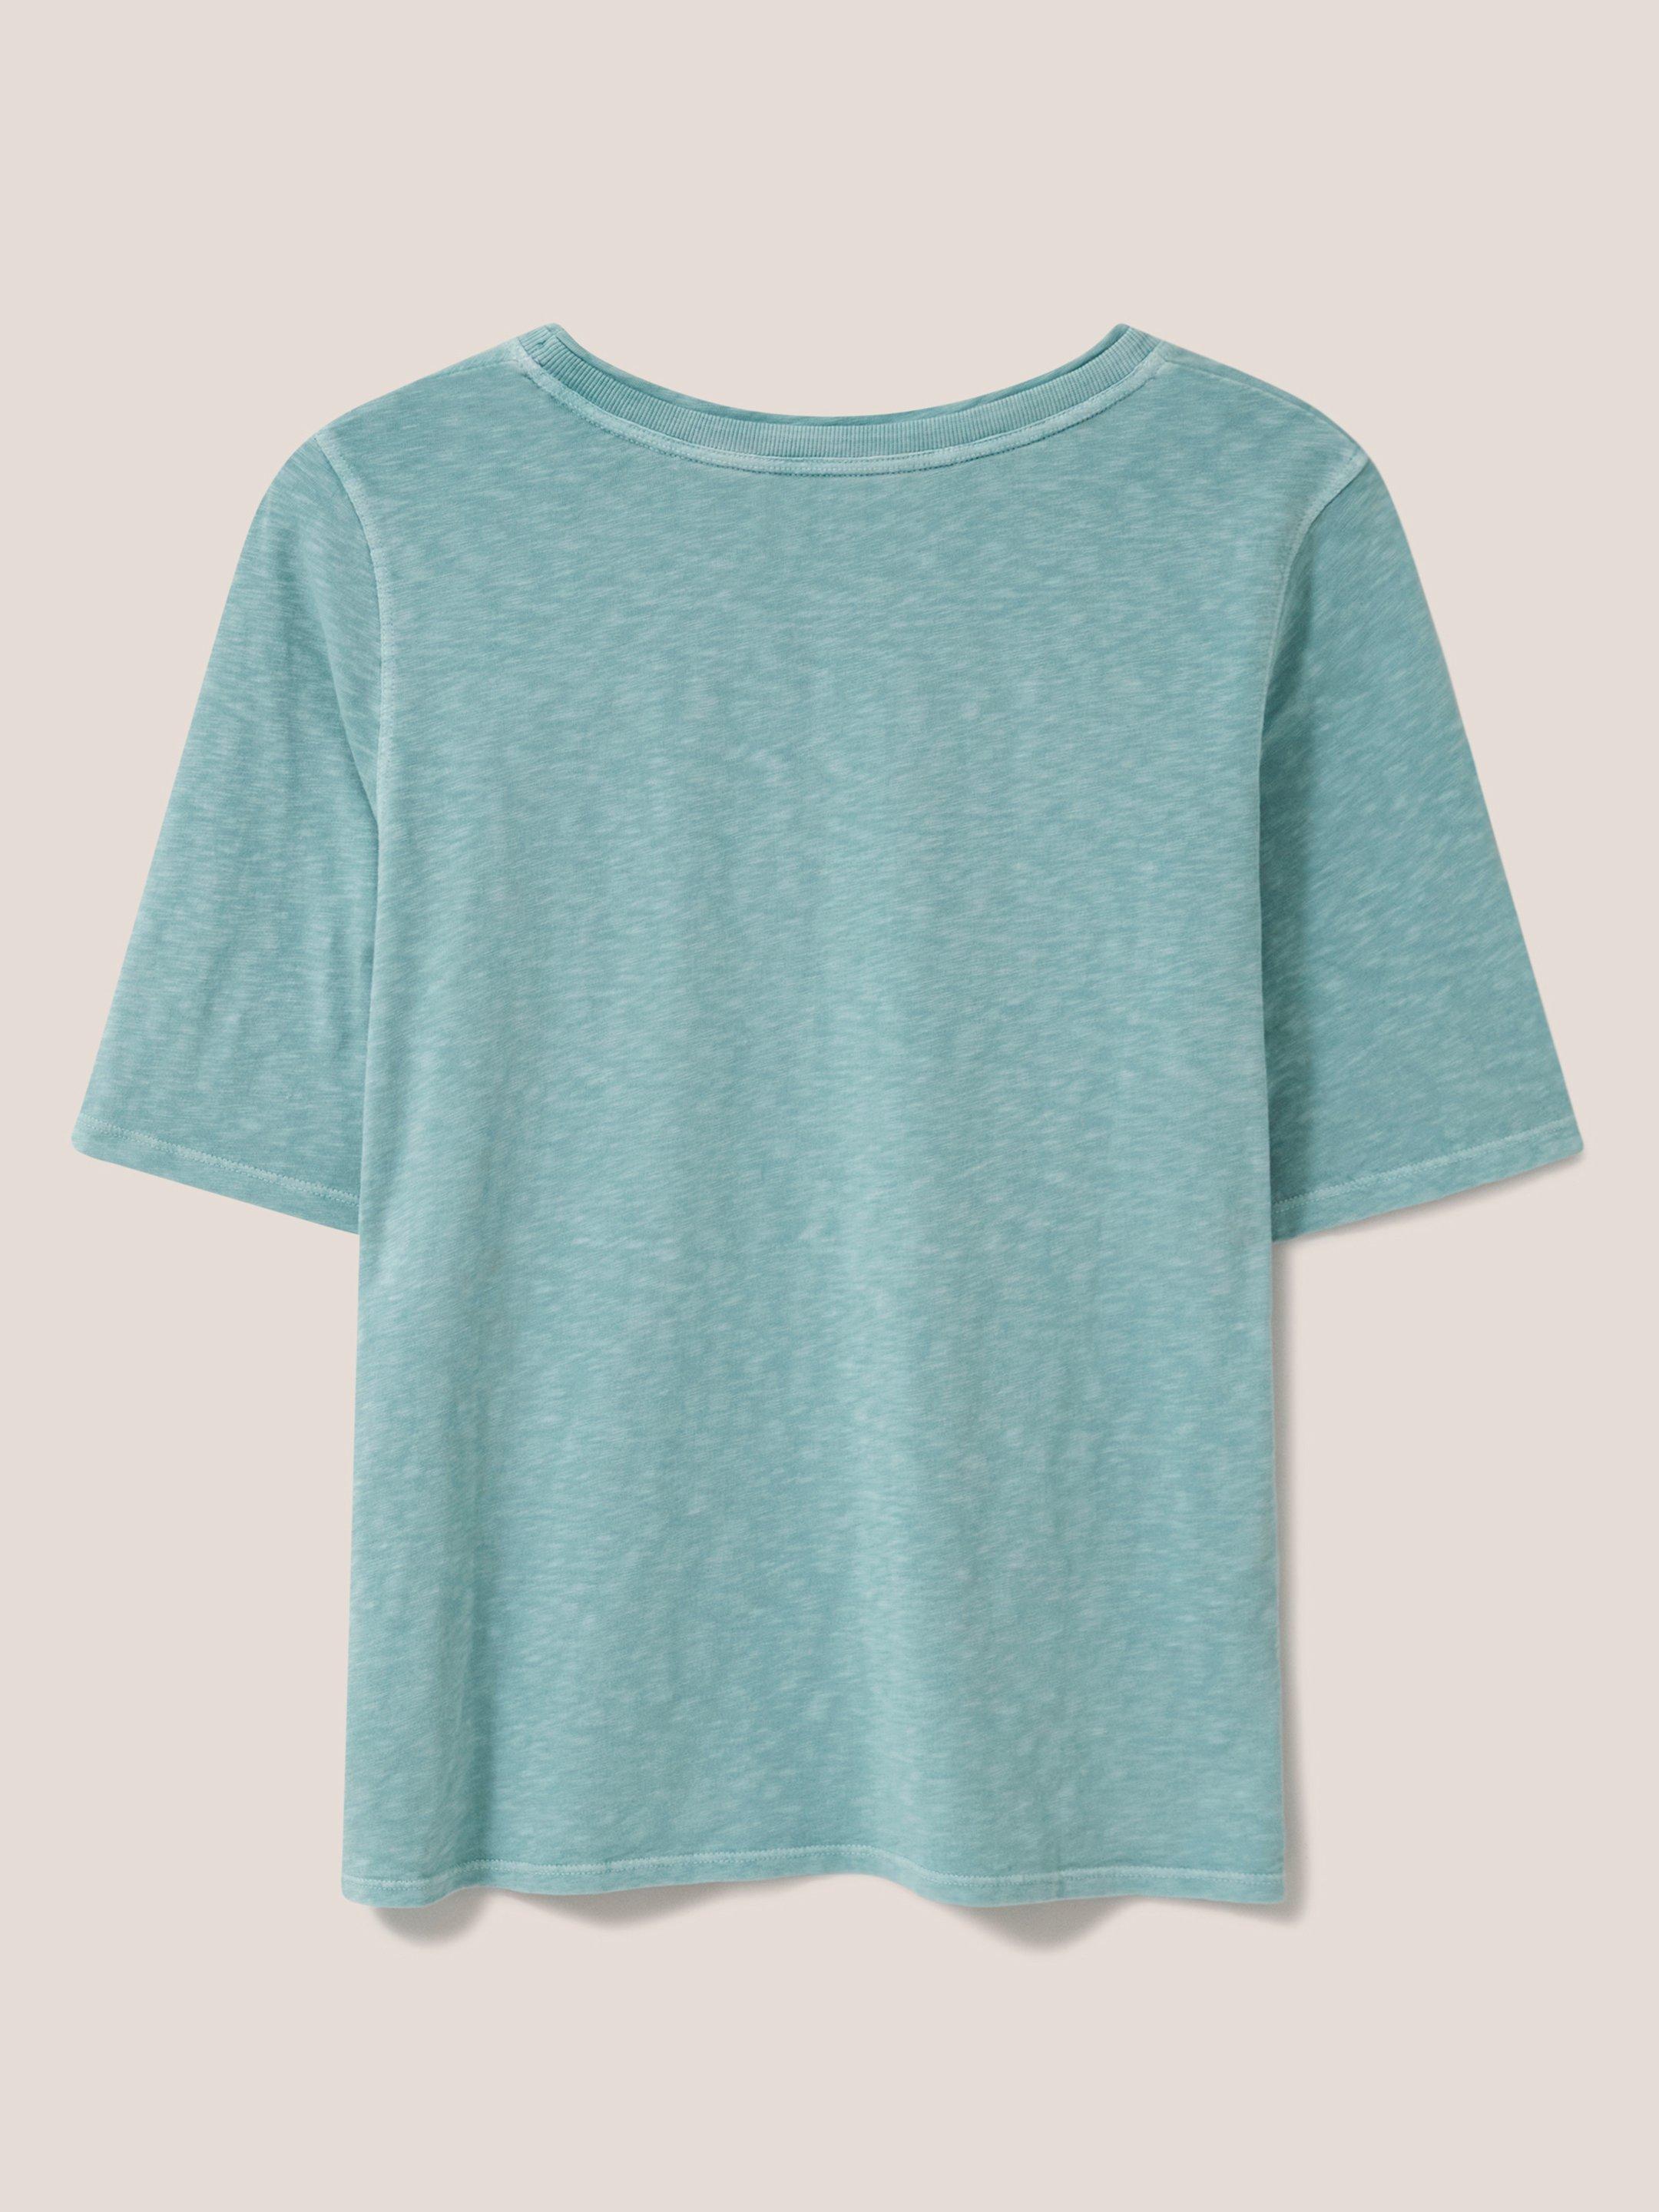 ANNABEL TEE in MID TEAL - FLAT BACK